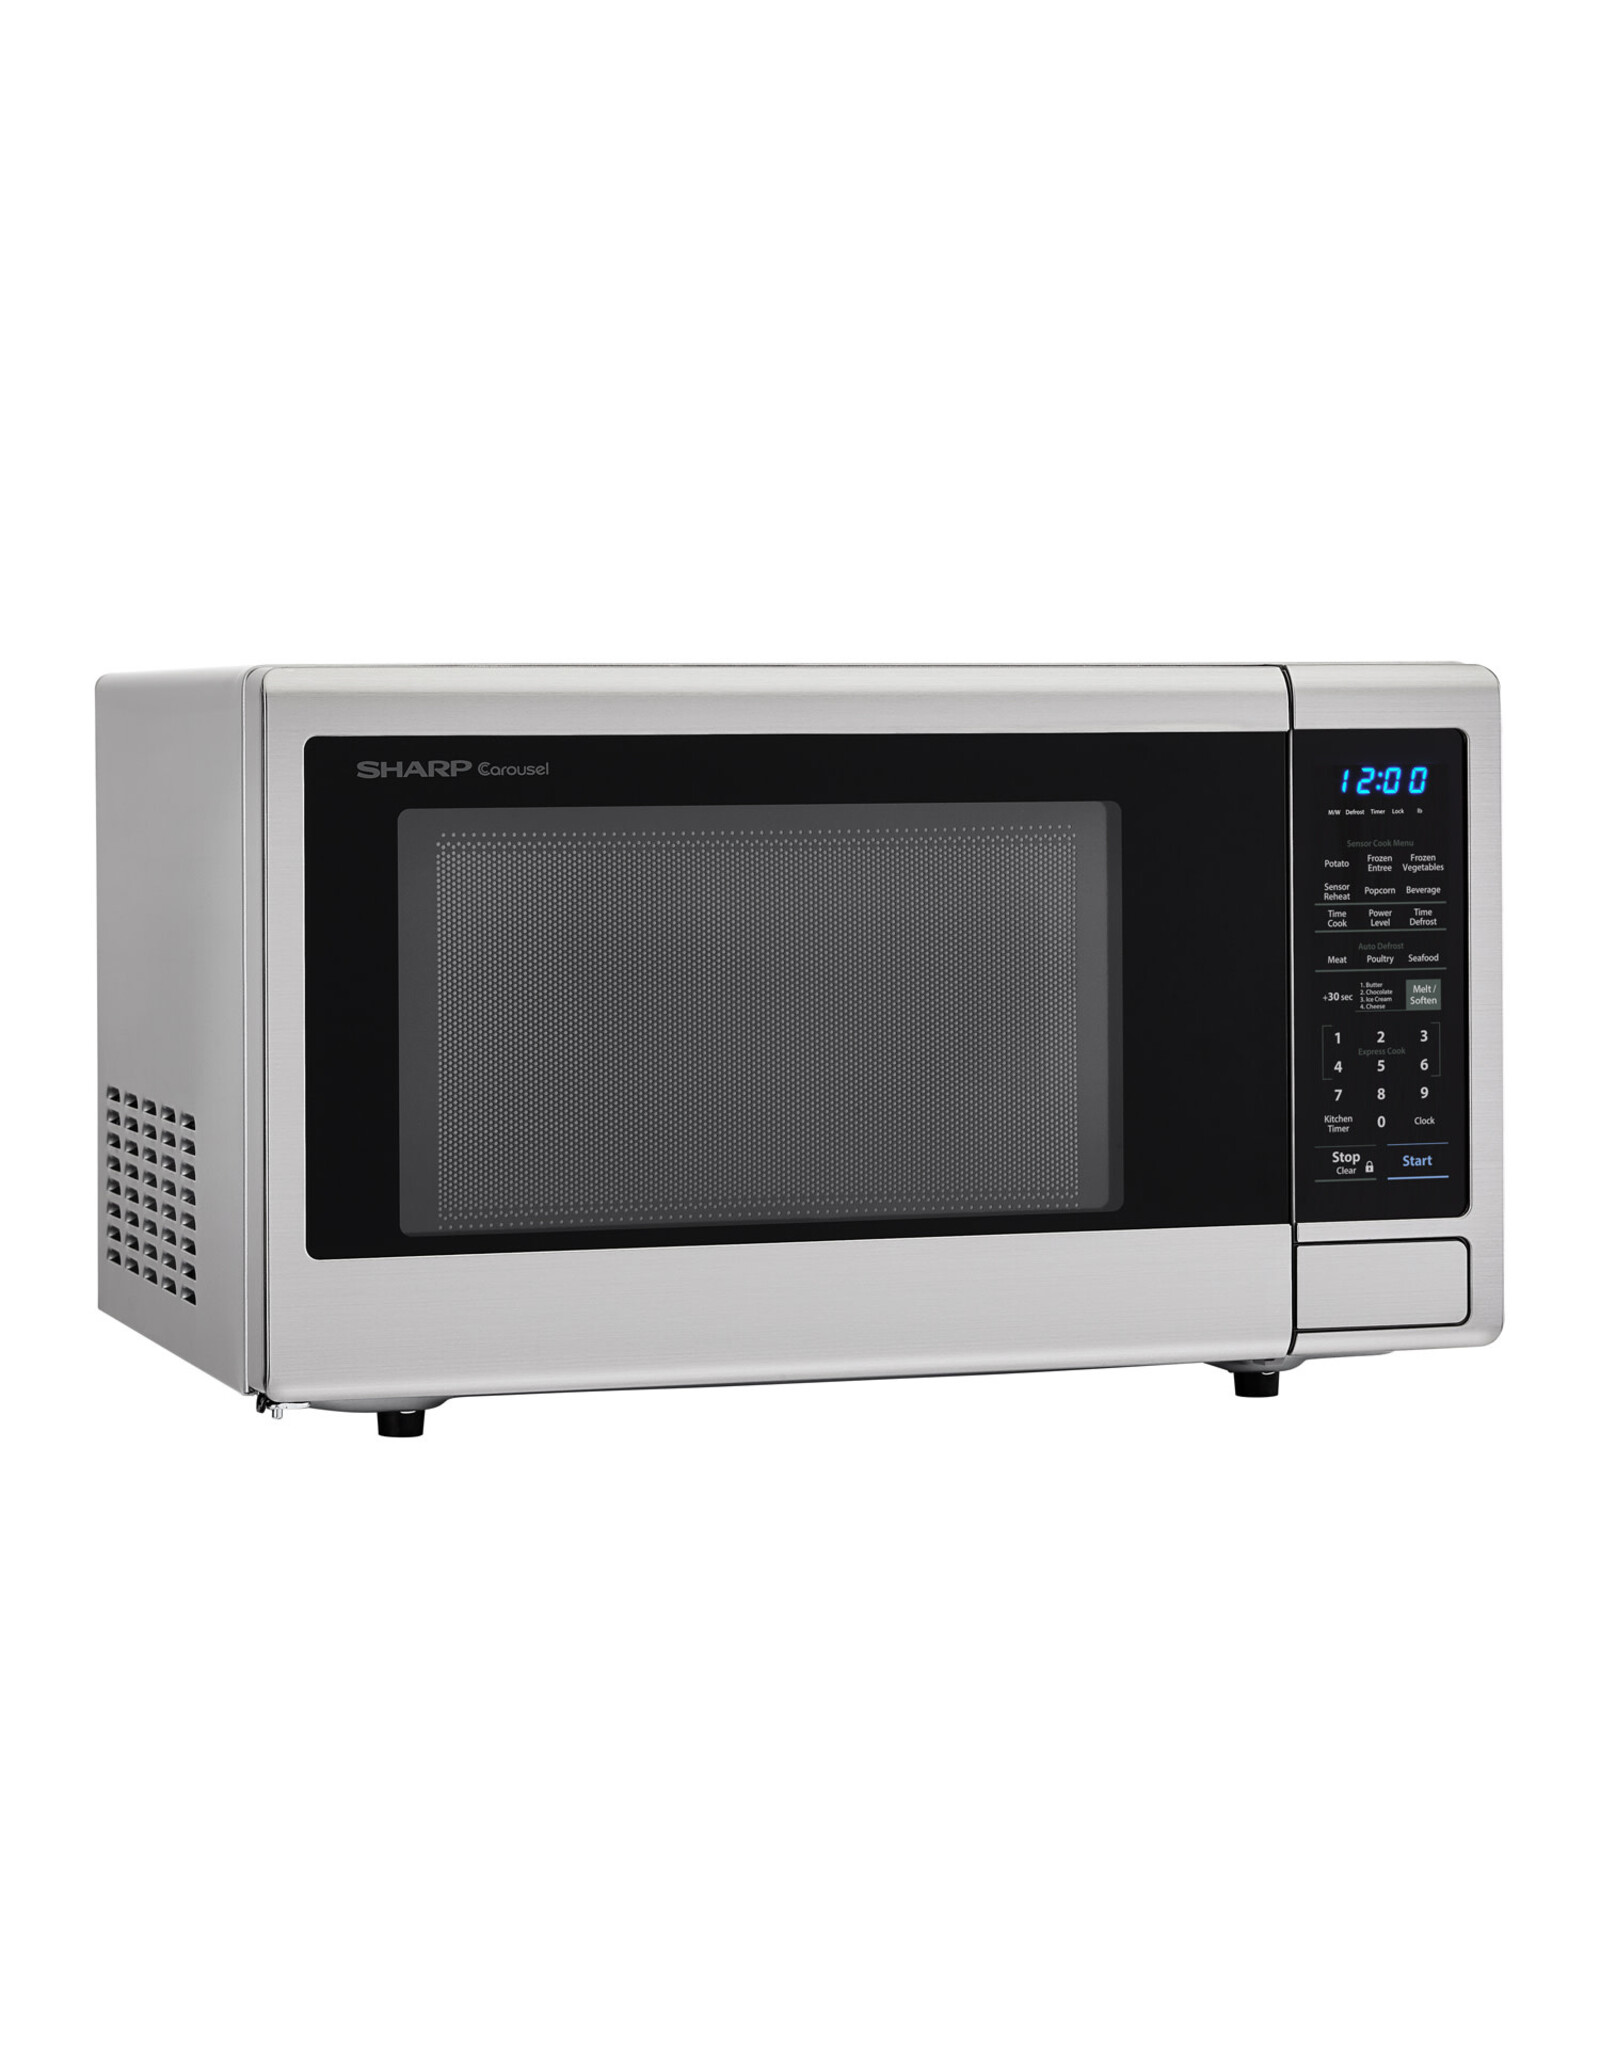 2.2 cu. ft. 1200W Stainless Steel Countertop Microwave Oven (SMC2242DS)